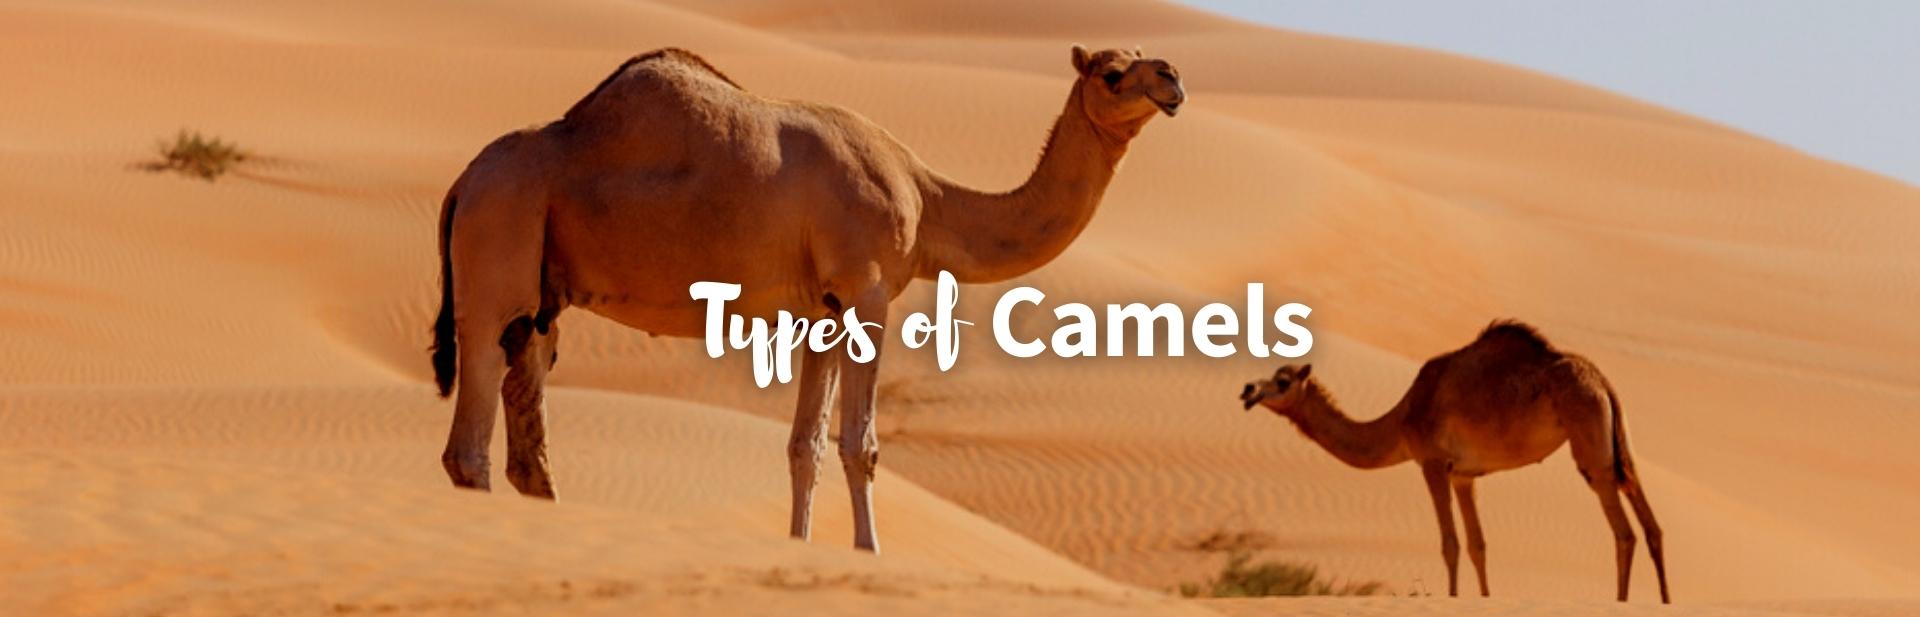 7 Types of Camels: An Adventure in Camel Kingdom and Their Amazing Adaptations